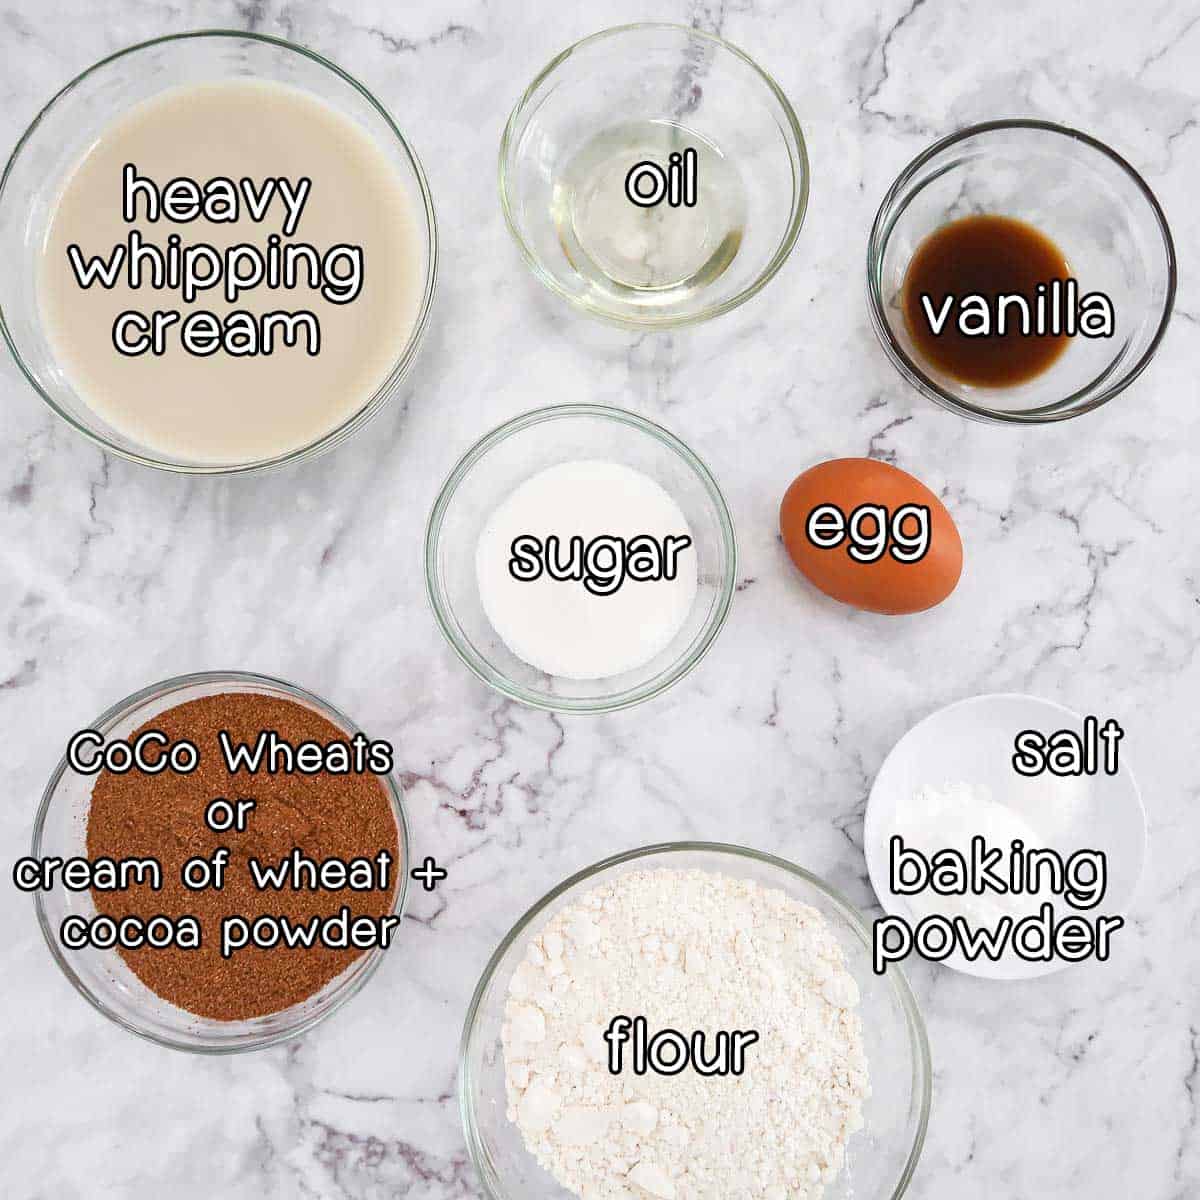 Overhead shot of ingredients - heavy whipping cream, oil, vanilla, sugar, egg, salt, baking powder, flour, and coco wheats (or creamy of wheat + cocoa powder).